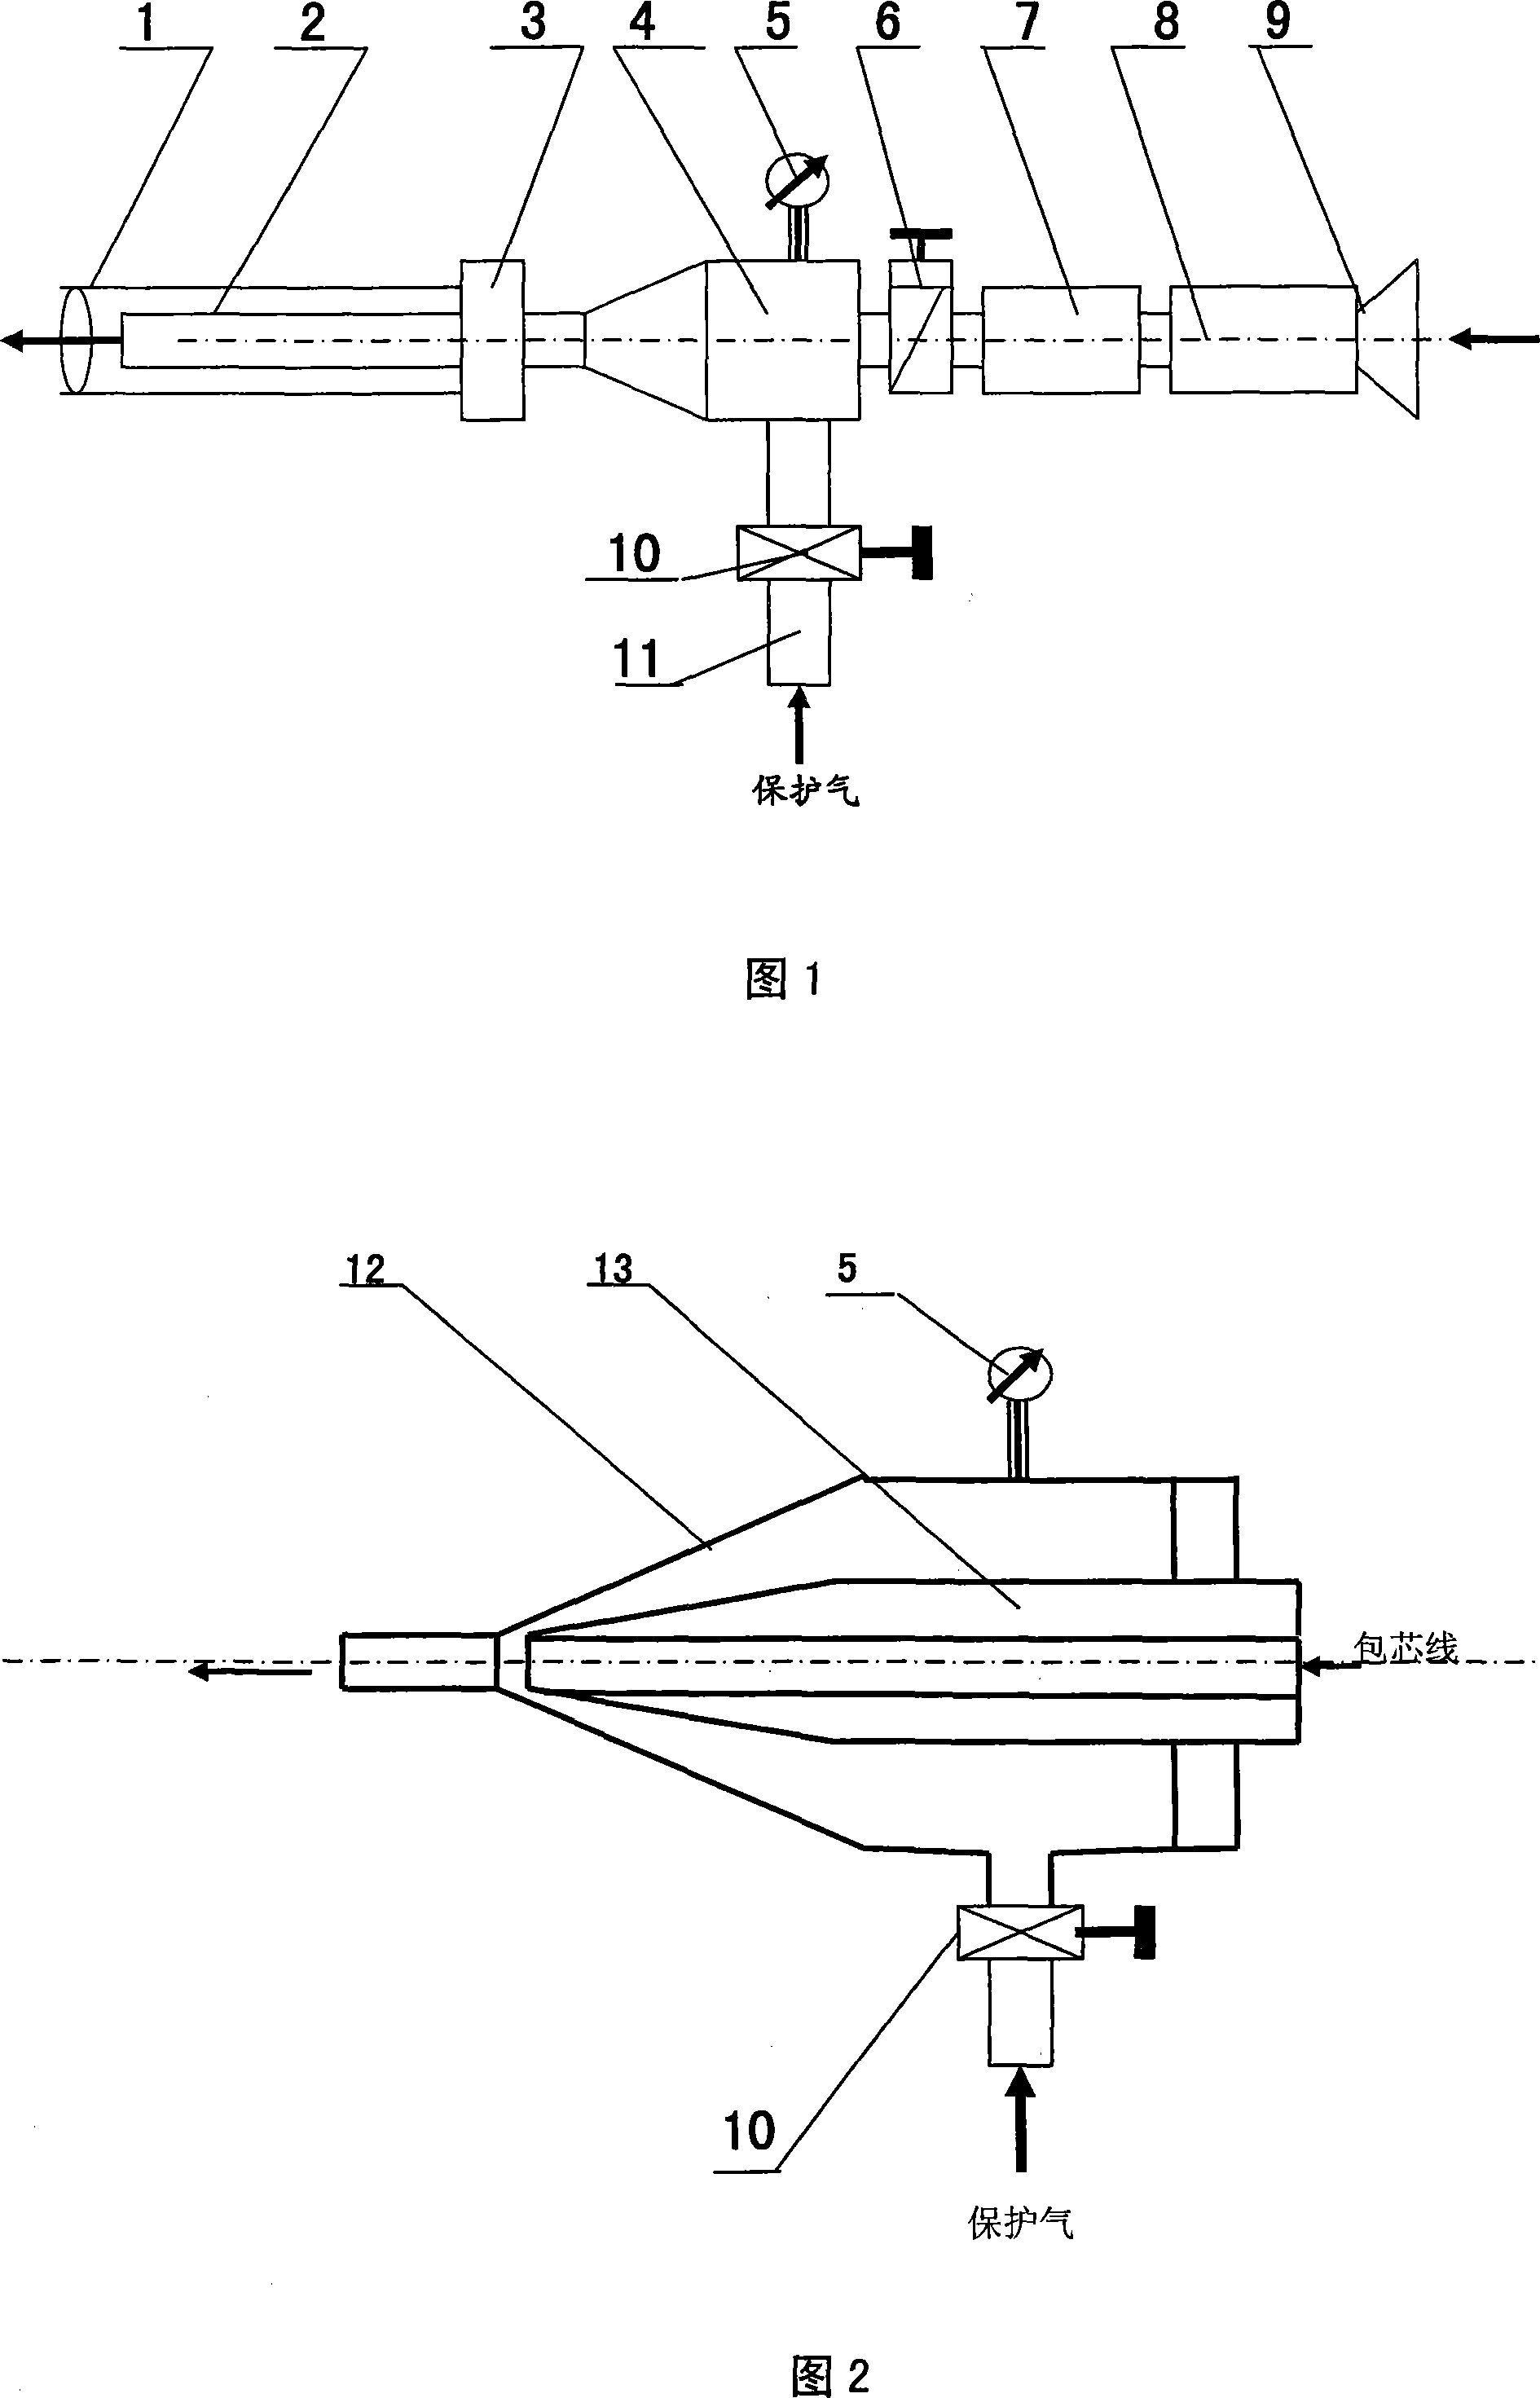 Method of on-line thread feeding and furnace protecting of ironmaking blast furnace and thread feeding device thereof